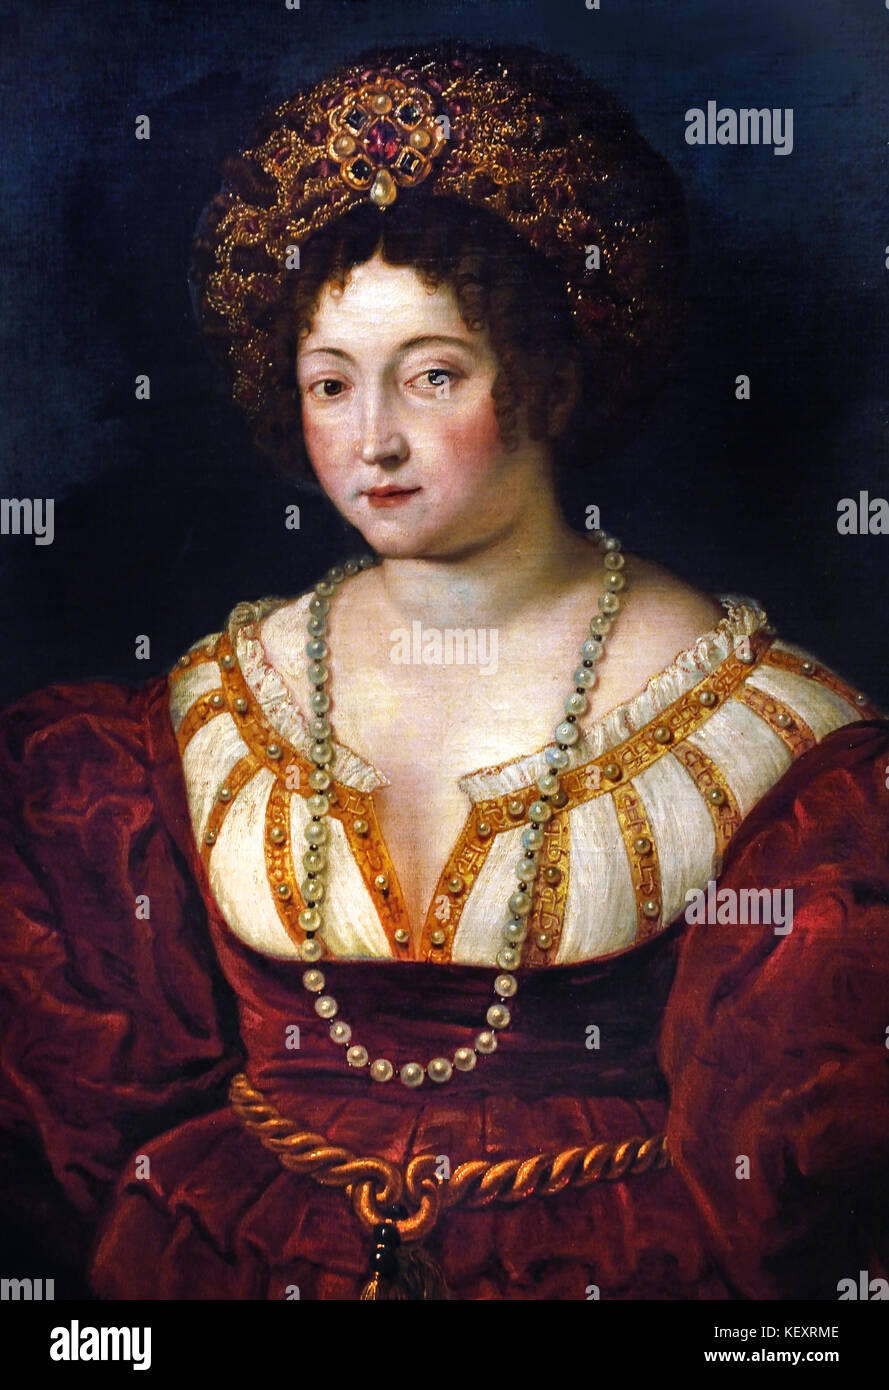 Isabella d'Este  1474 –1539 Marchesa of Mantua leading women of the Italian Renaissance as a major cultural and political figure. Patron of the arts - leader of fashion, whose innovative style of dressing was copied by women throughout Italy and at the French court. The poet Ariosto labeled her as the 'liberal and magnanimous Isabella', Peter Paul Rubens (1577–1640) Painter in the Flemish Baroque tradition .Antwerp, Antwerpen, Belgium, Stock Photo